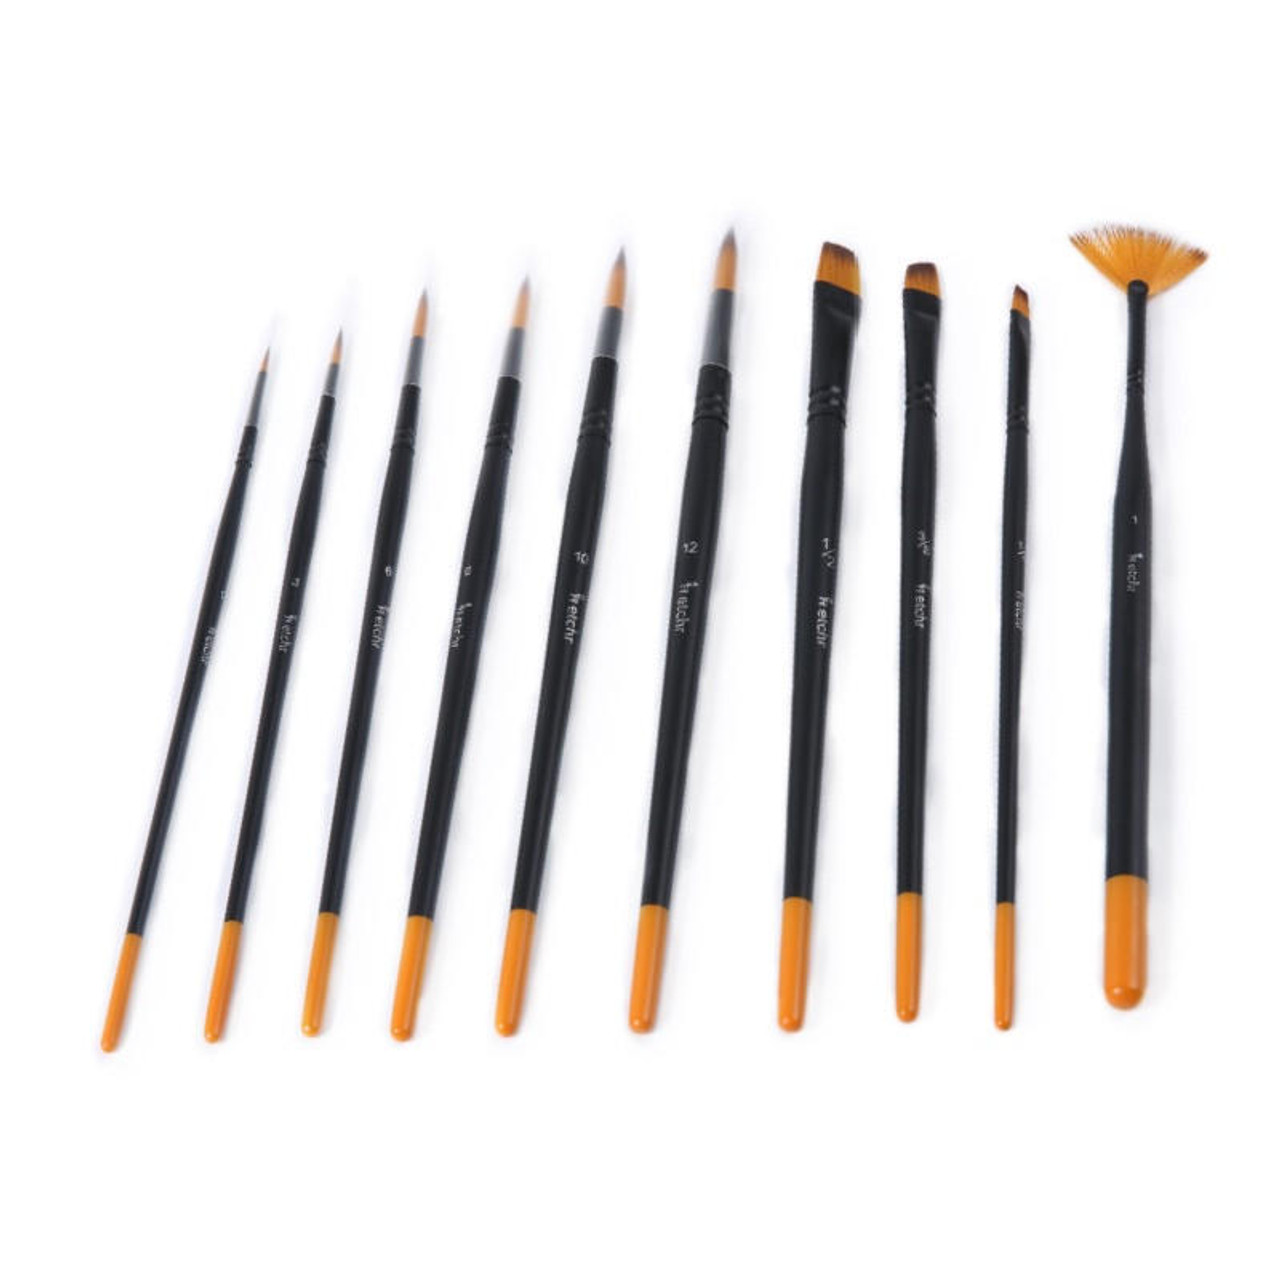 Etchr Watercolour Brushes